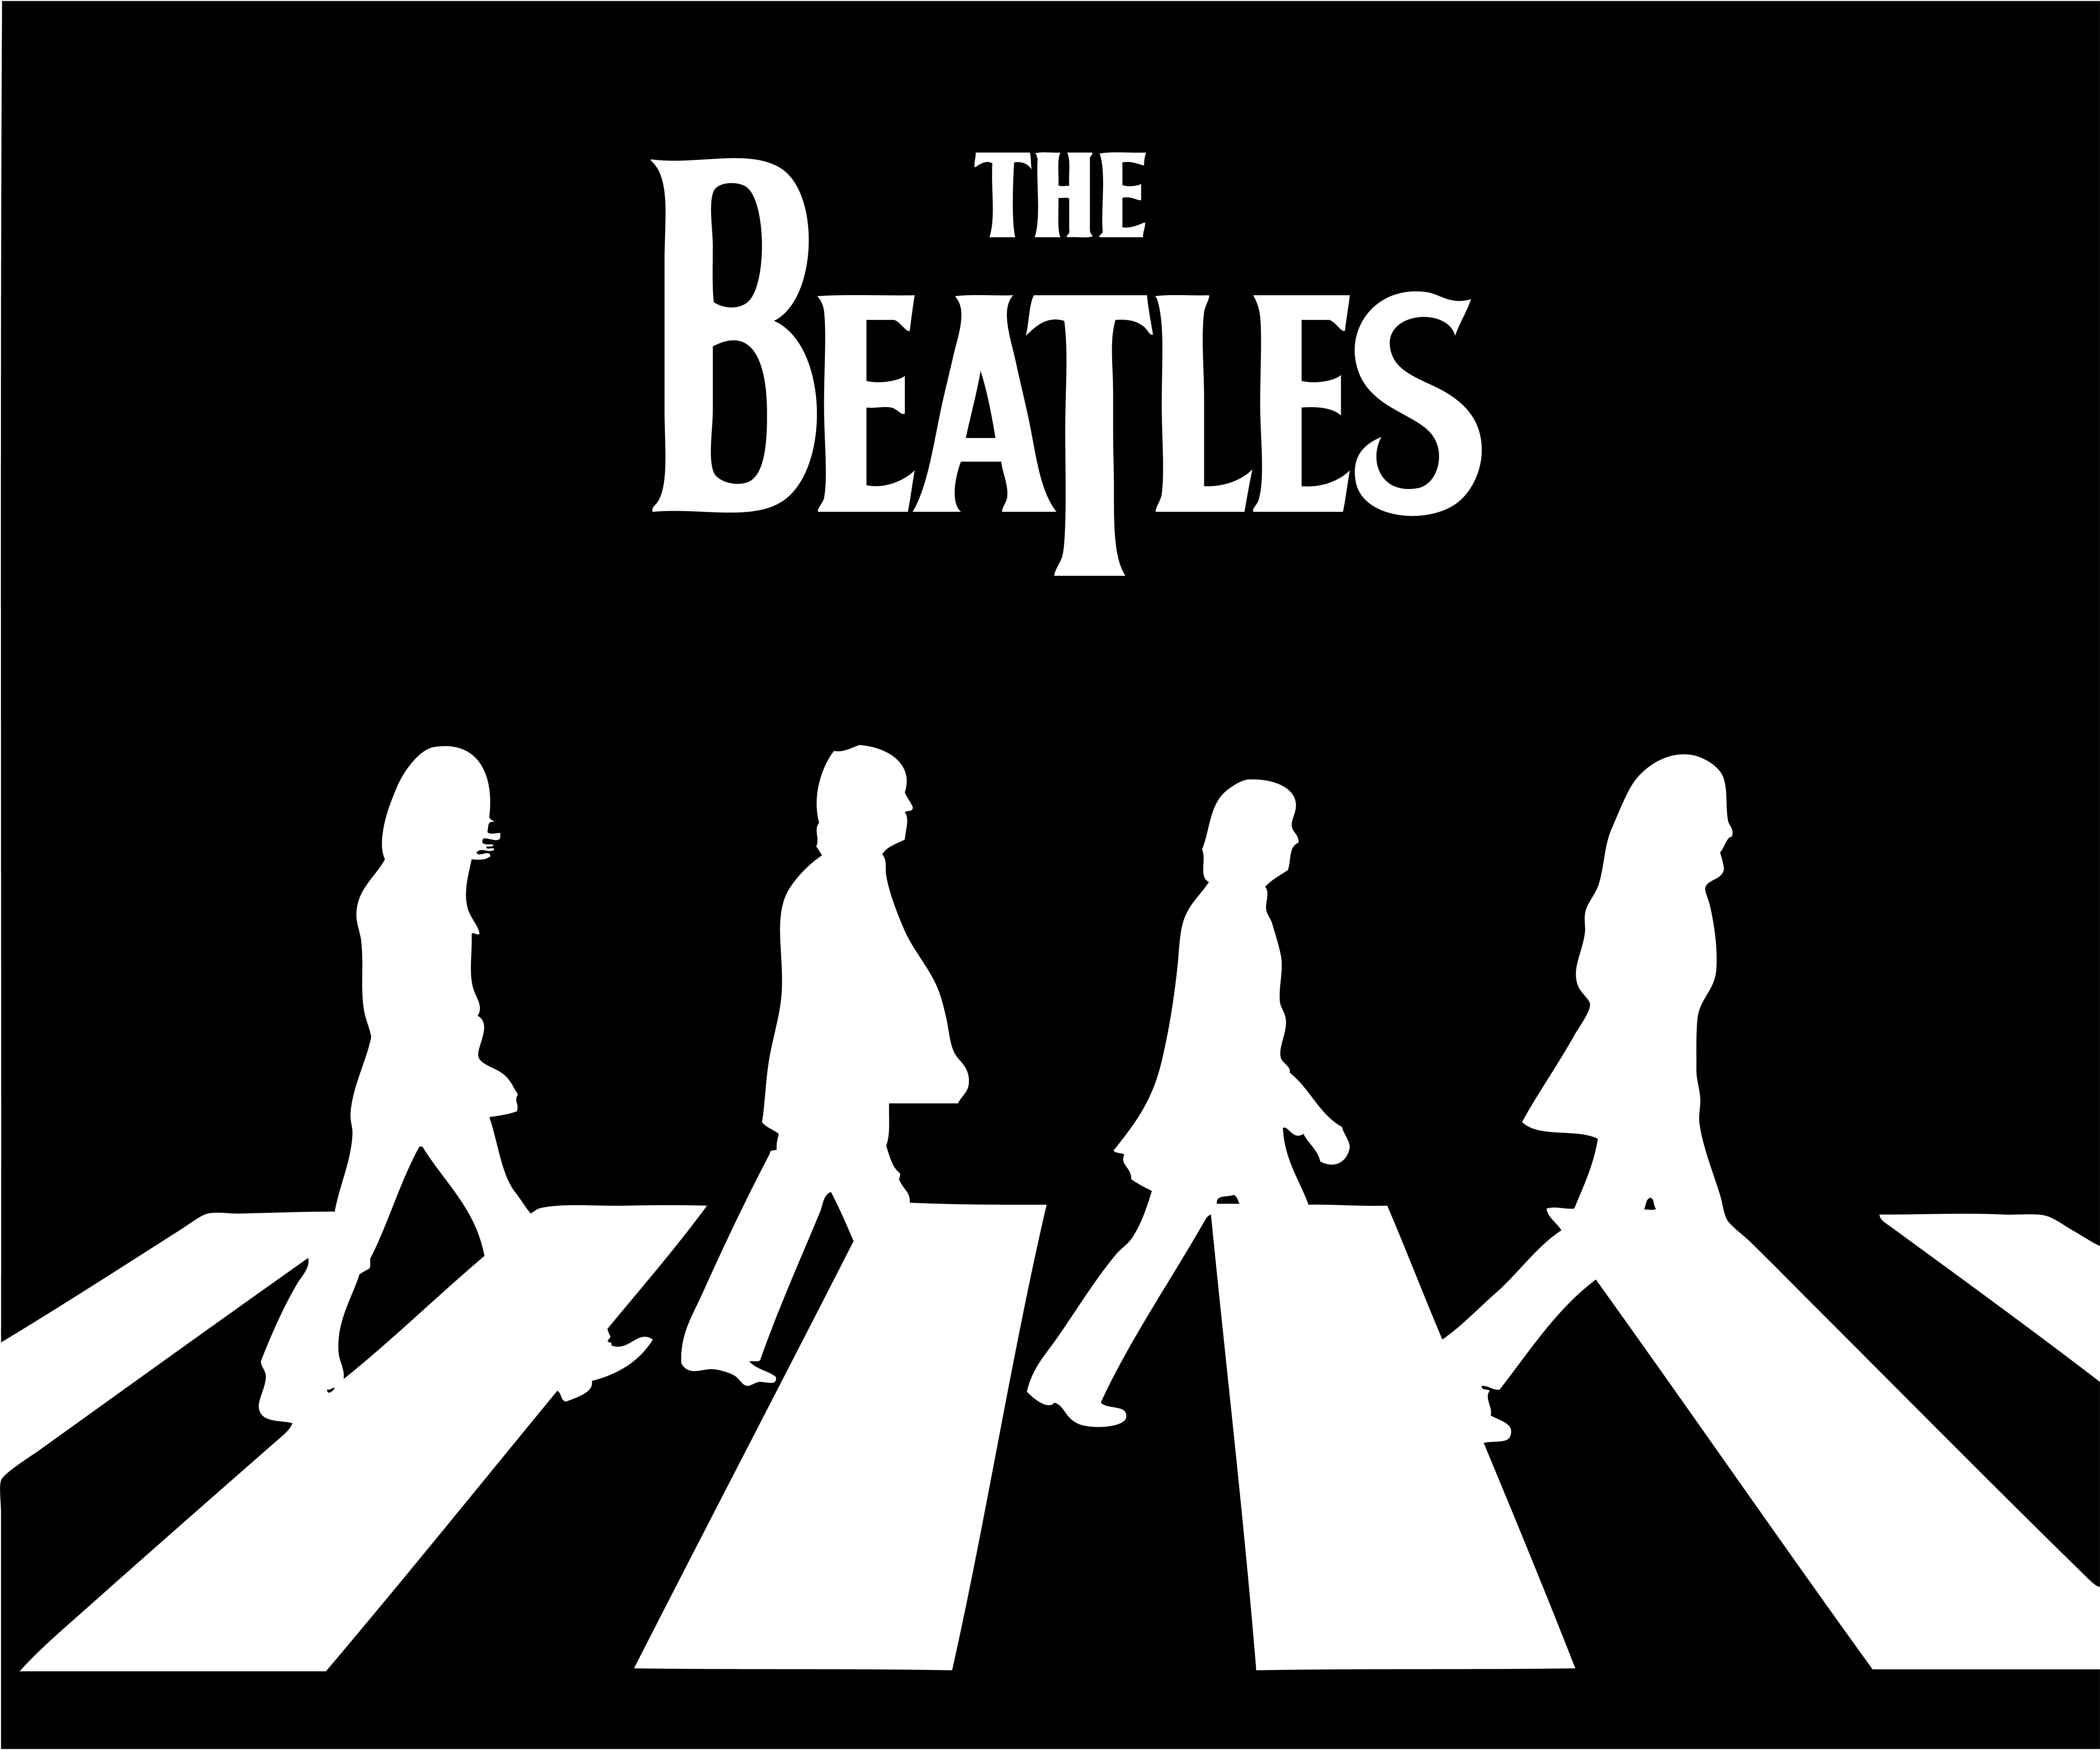 The Beatles Black and White Logo - The Beatles Logos Related Keywords & Suggestions - The Beatles ...